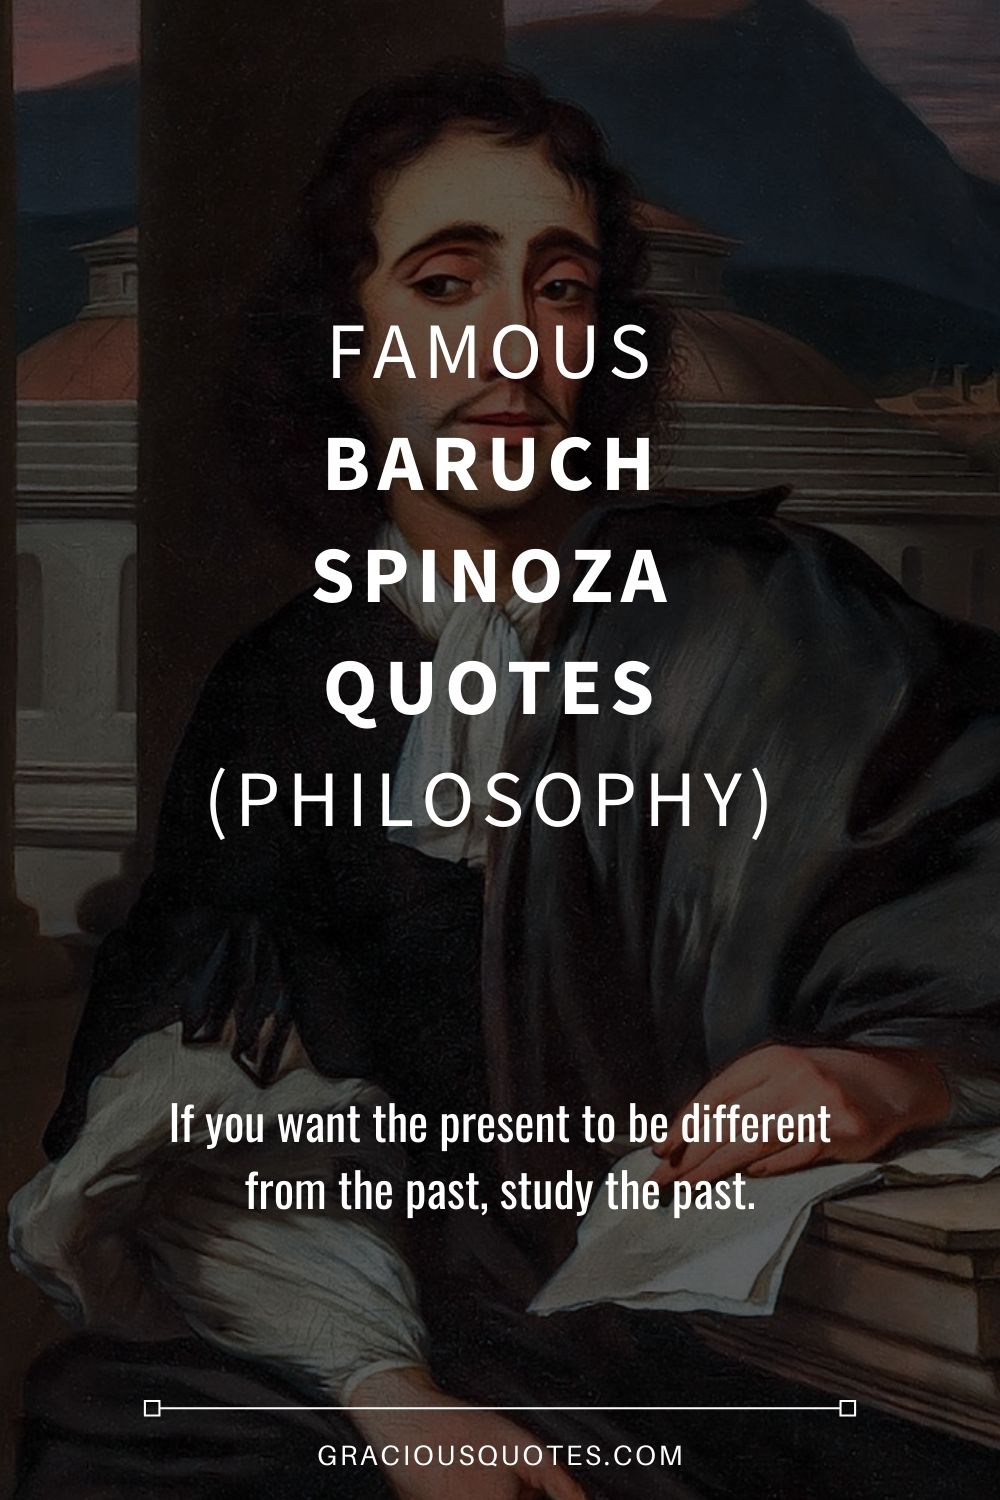 Famous Baruch Spinoza Quotes (PHILOSOPHY) - Gracious Quotes